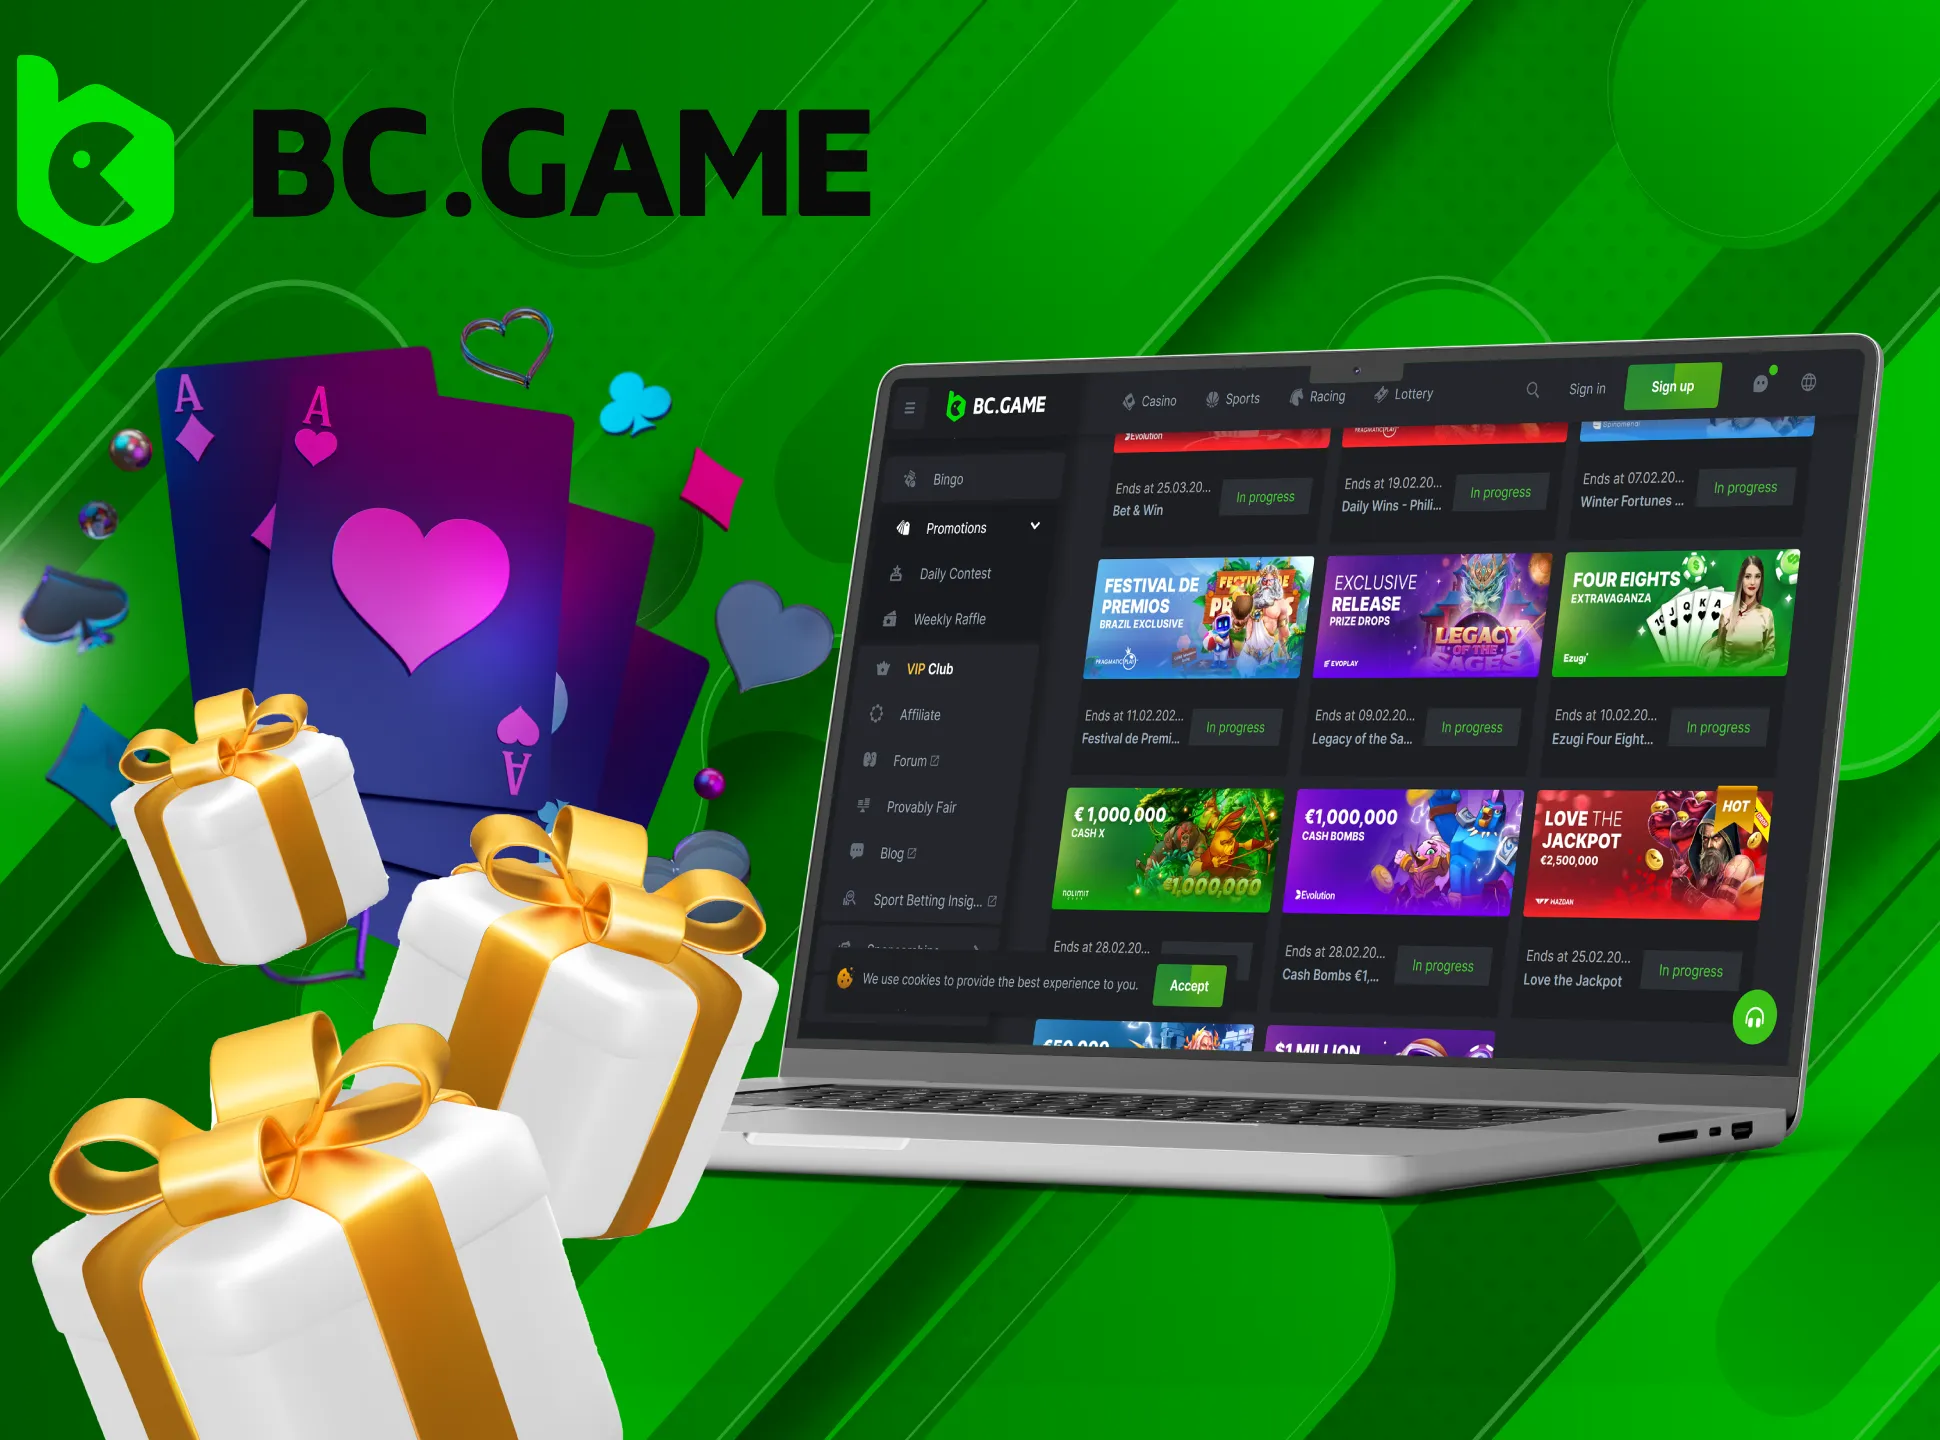 BC Game's excellent welcome bonus gives any newcomer a confident and fast start.